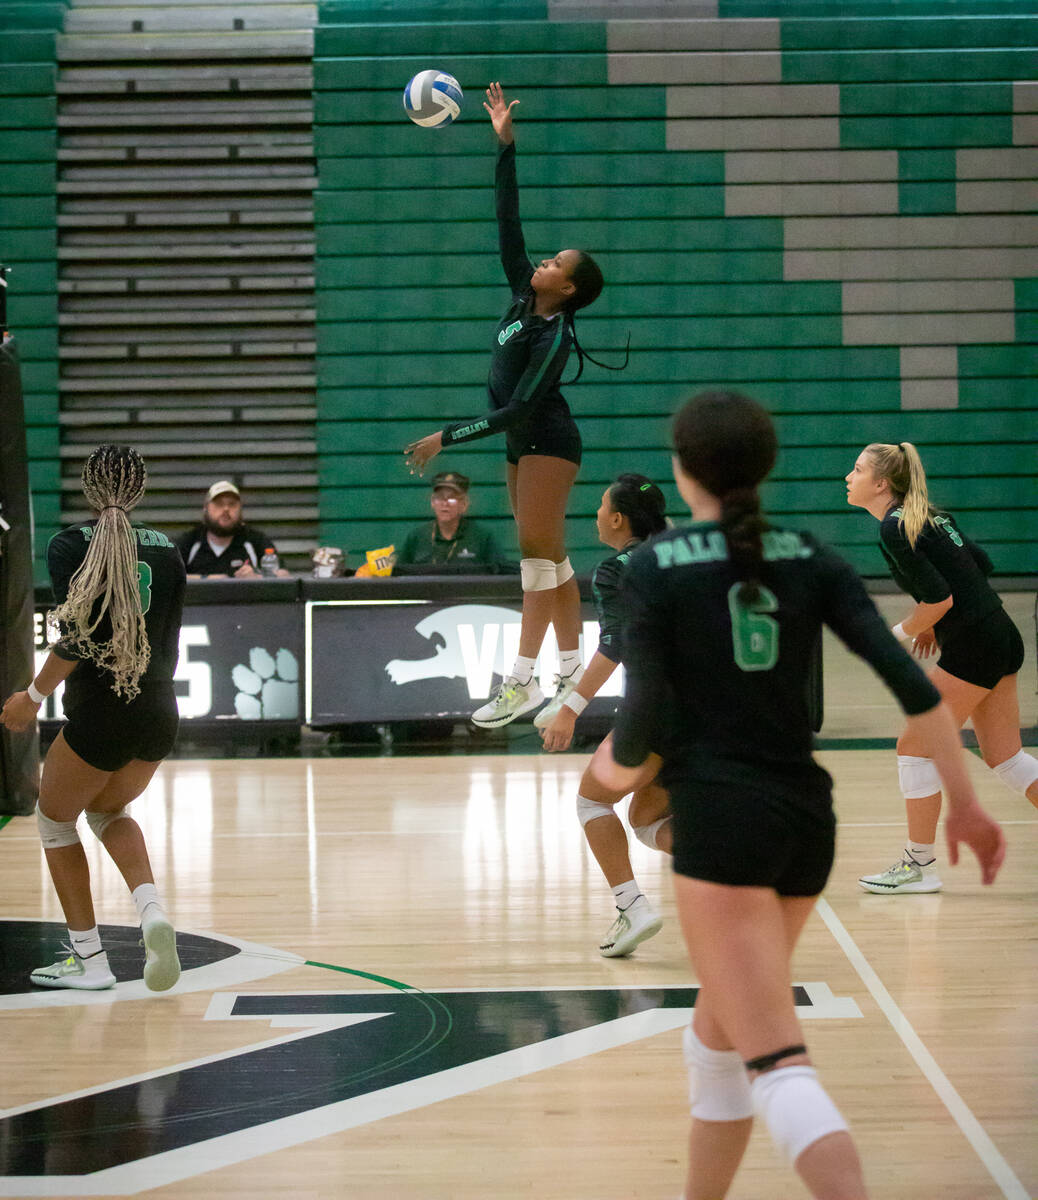 Palo Verde’s Peyton Reese (5) serves the ball during a volleyball game at Palo Verde hig ...